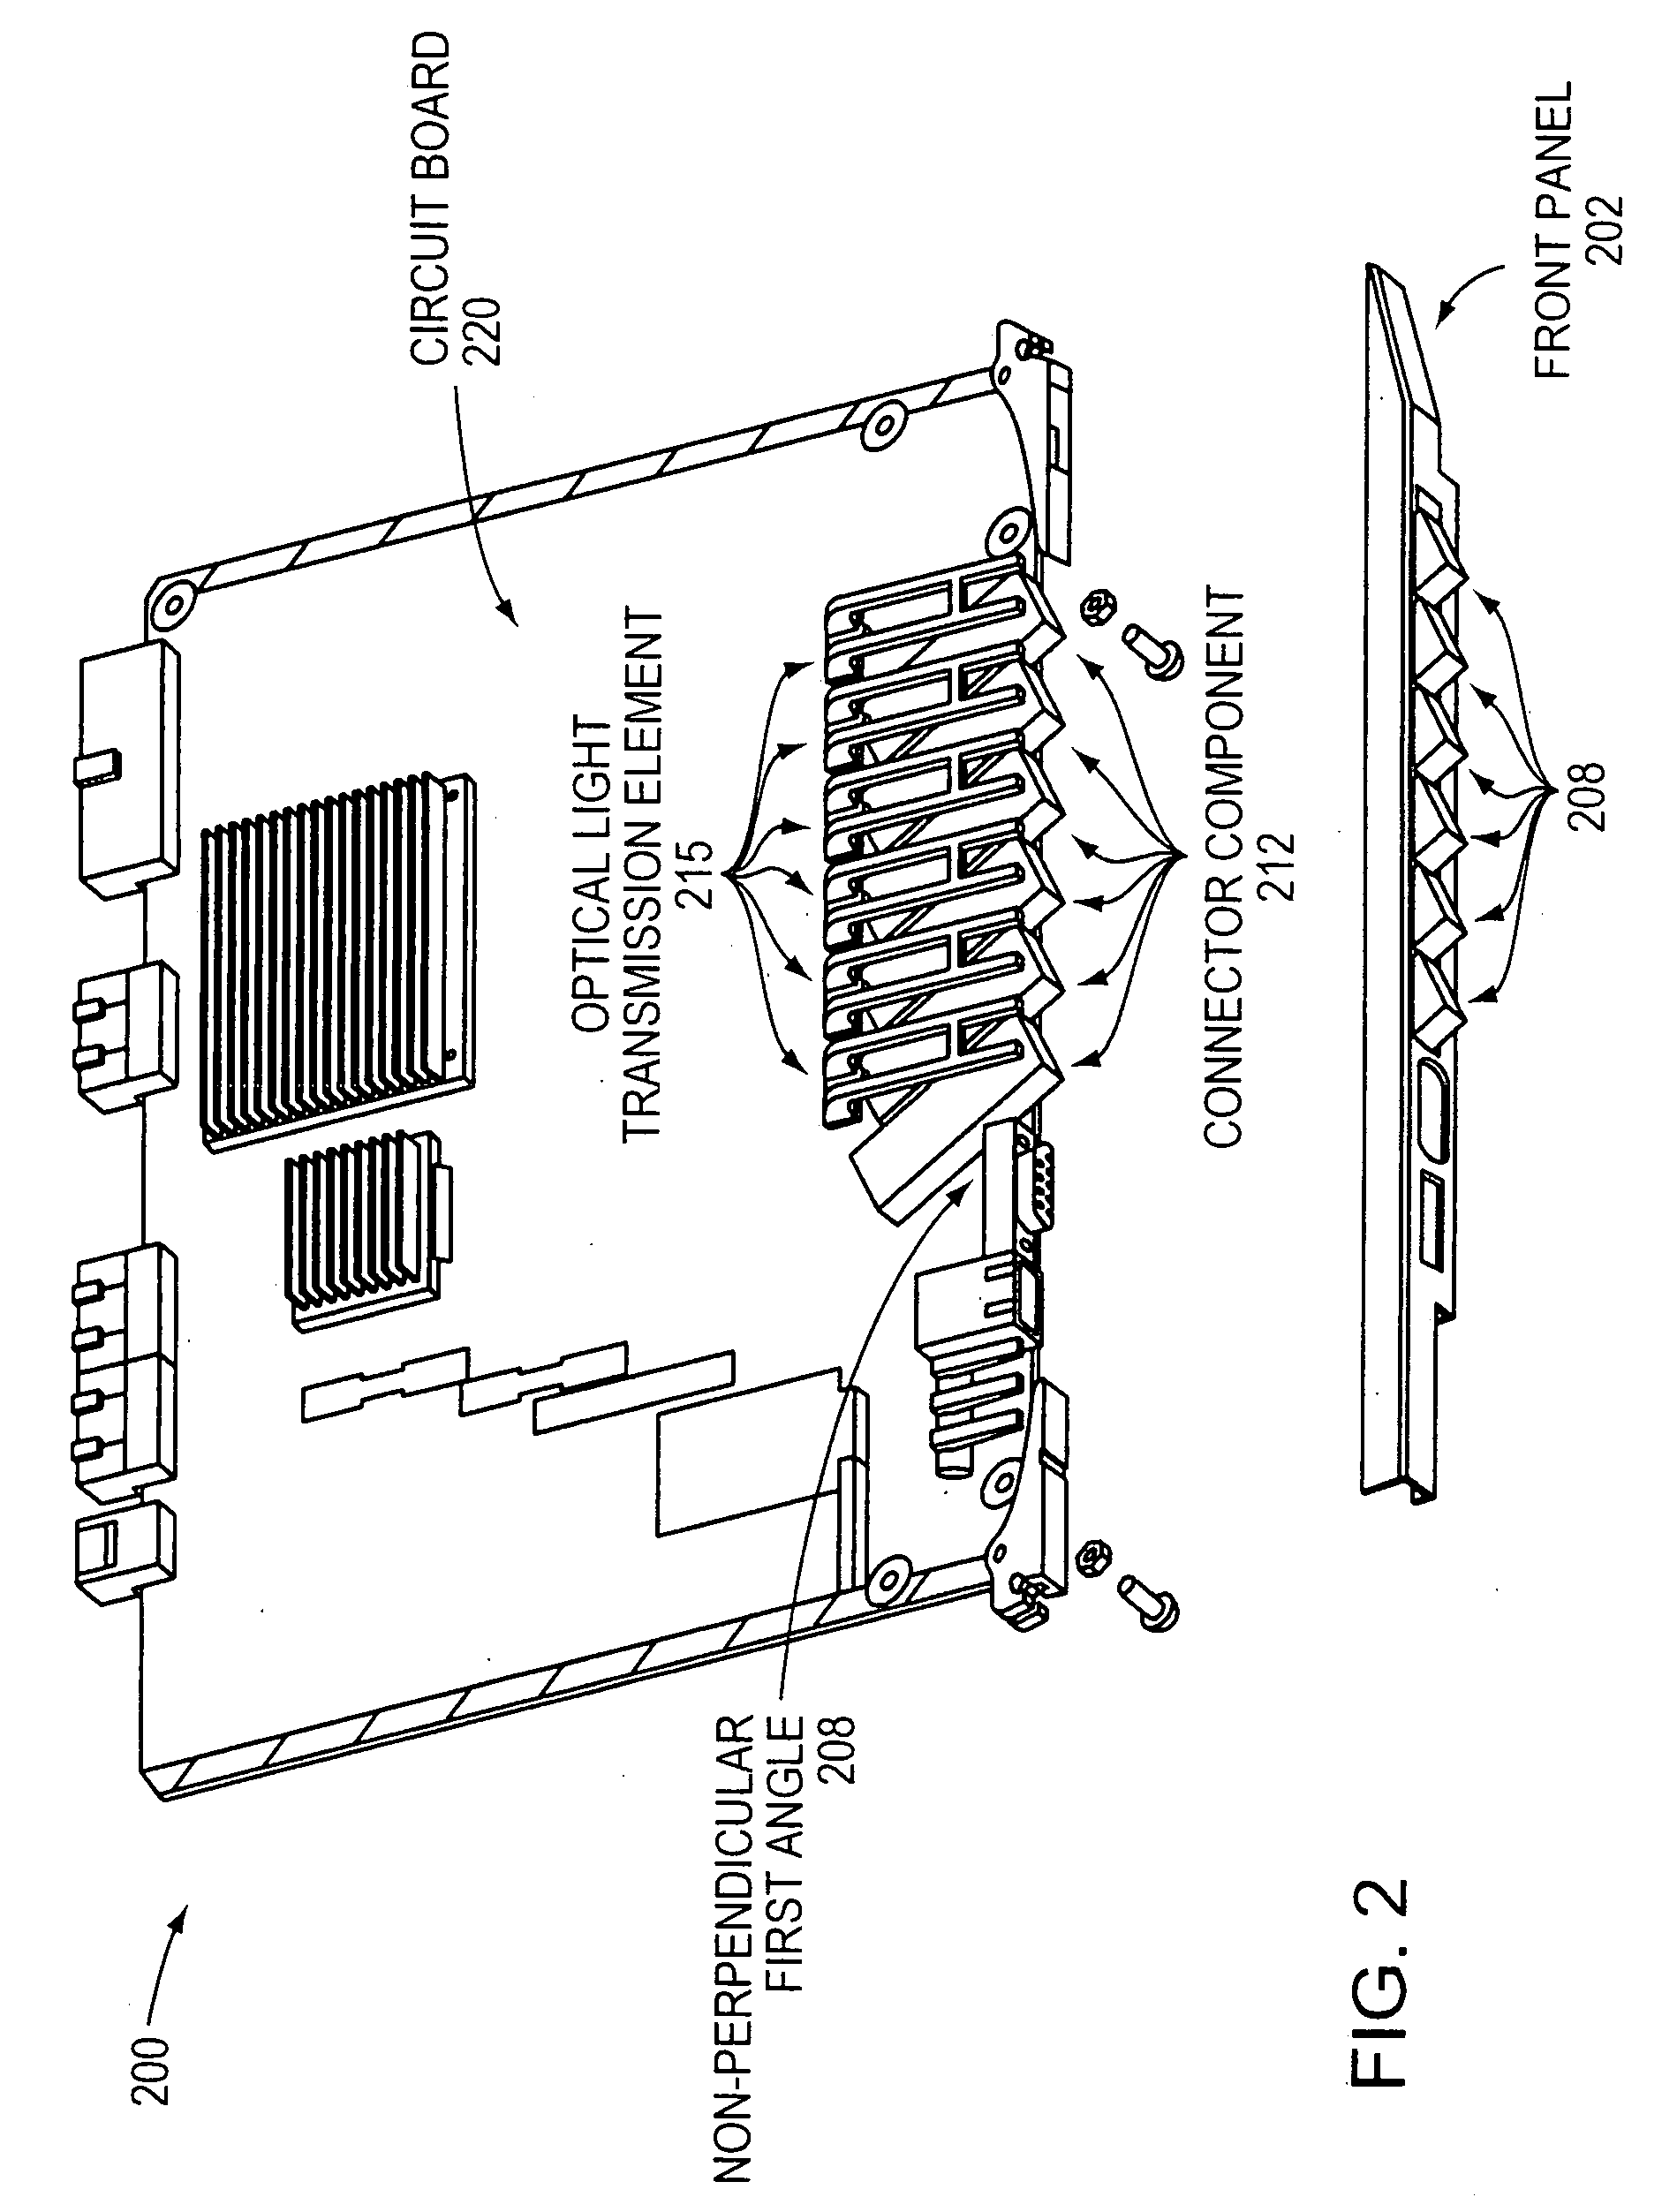 Method and apparatus for providing optical indications about a state of a circuit